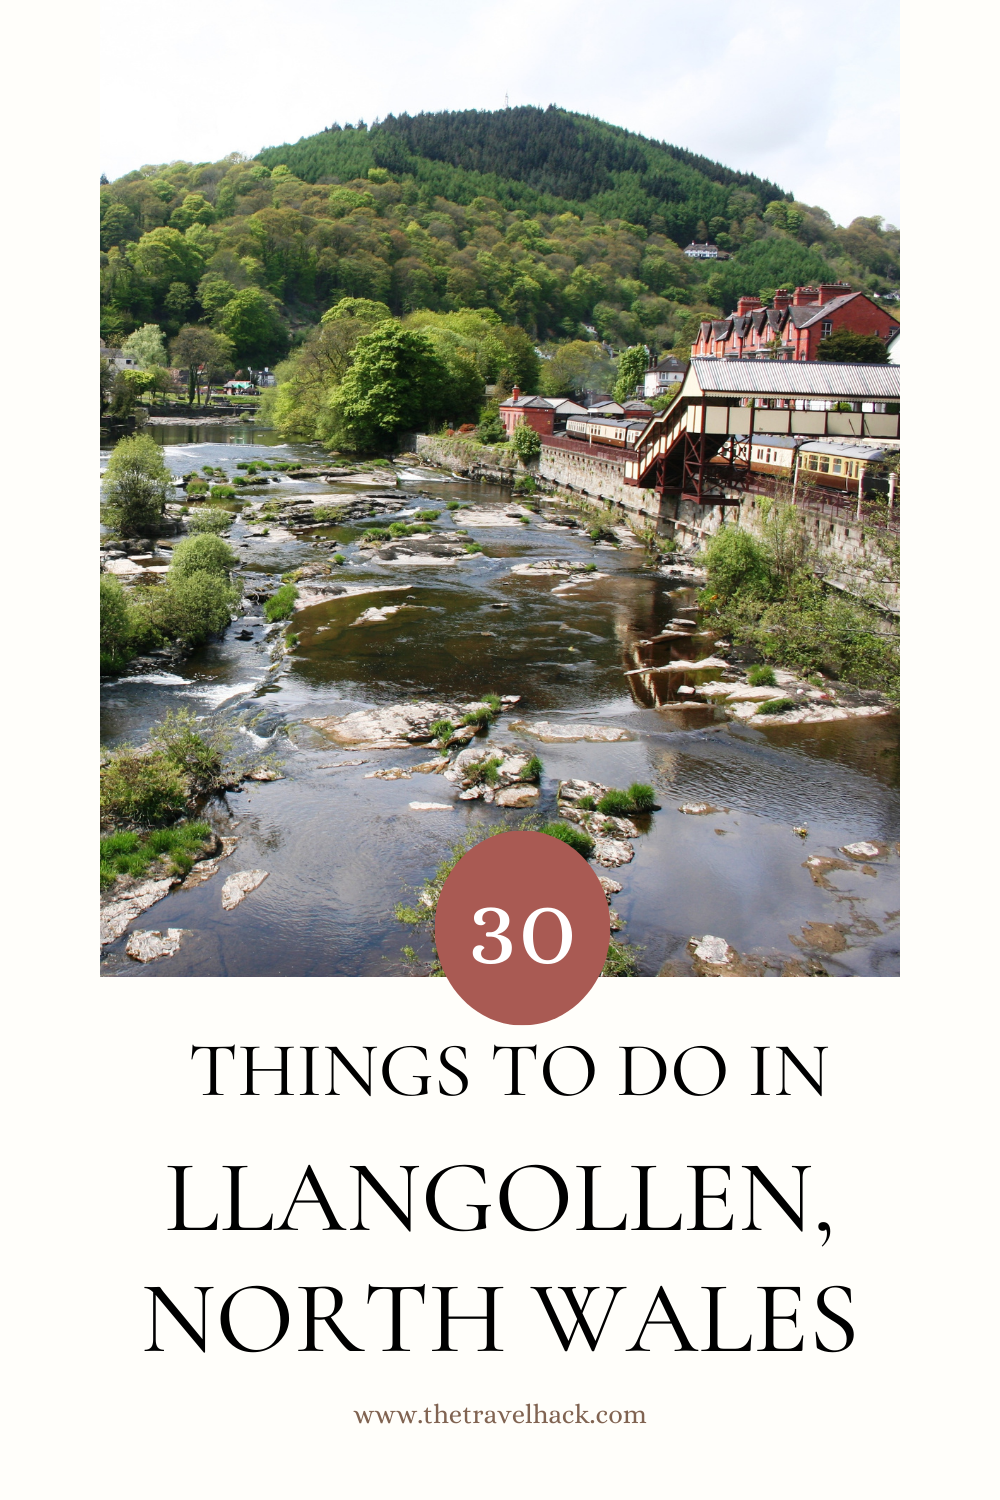 Things to do in Llangollen